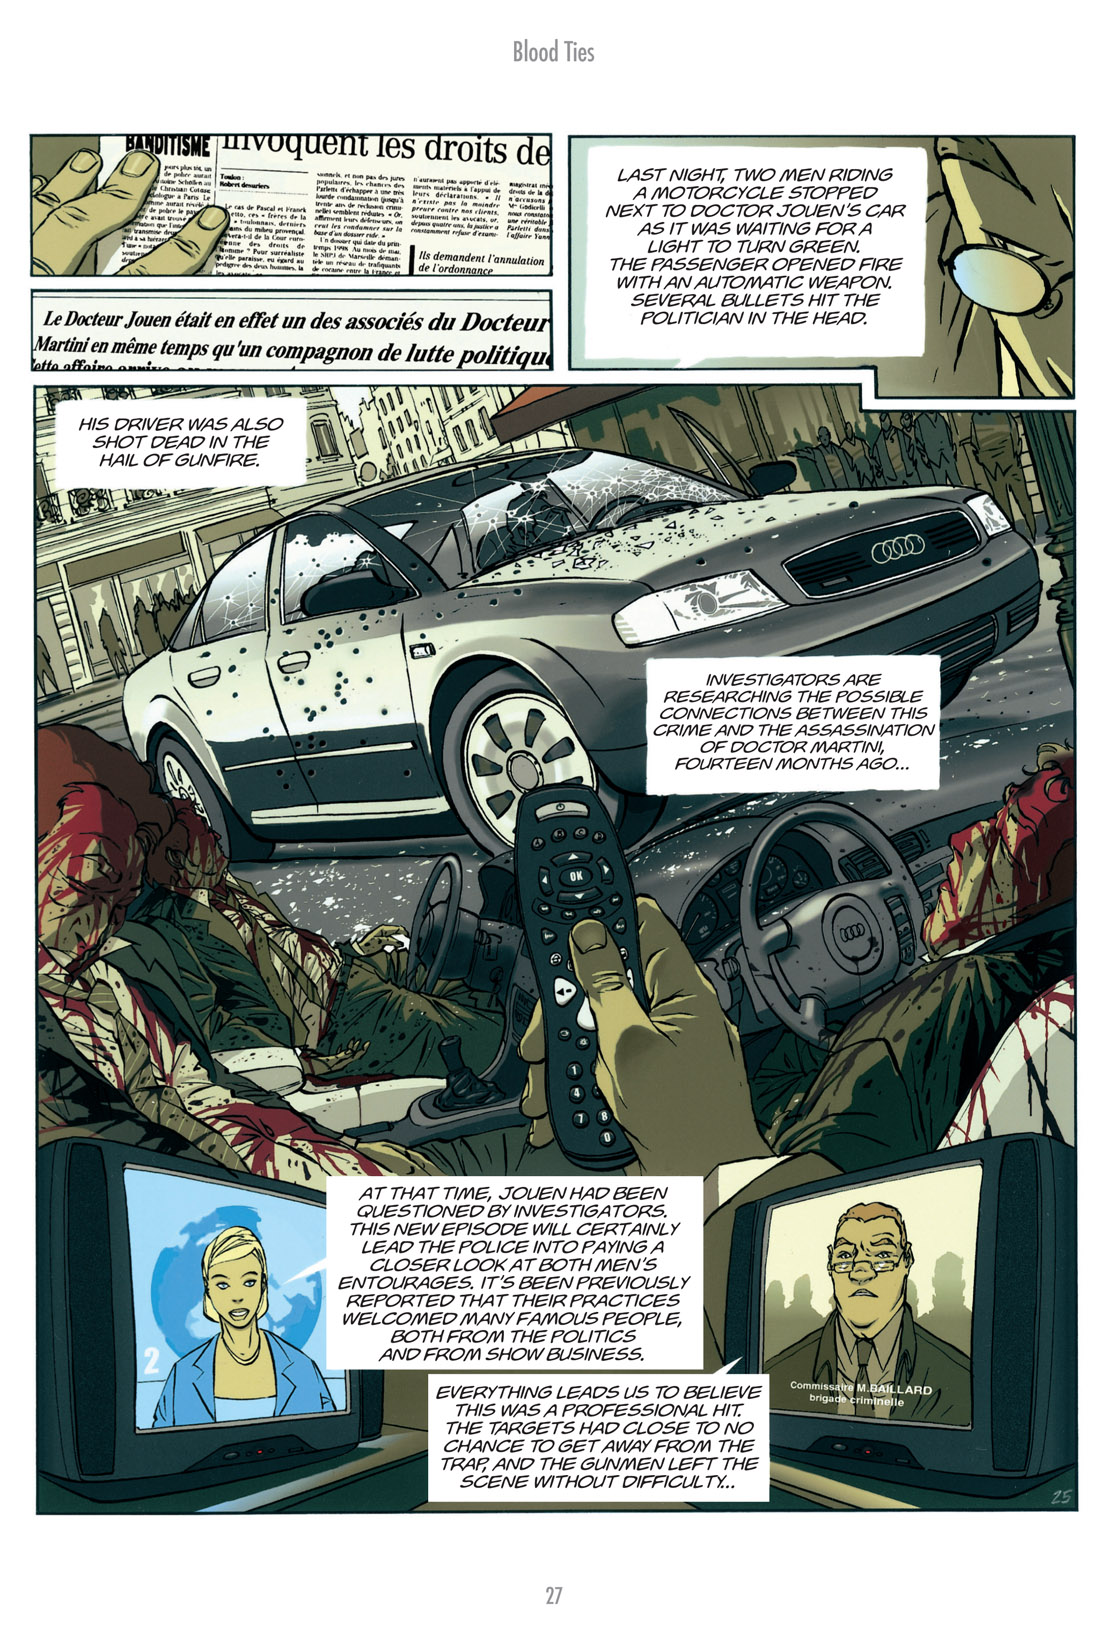 Read online The Killer comic -  Issue # TPB 2 - 94